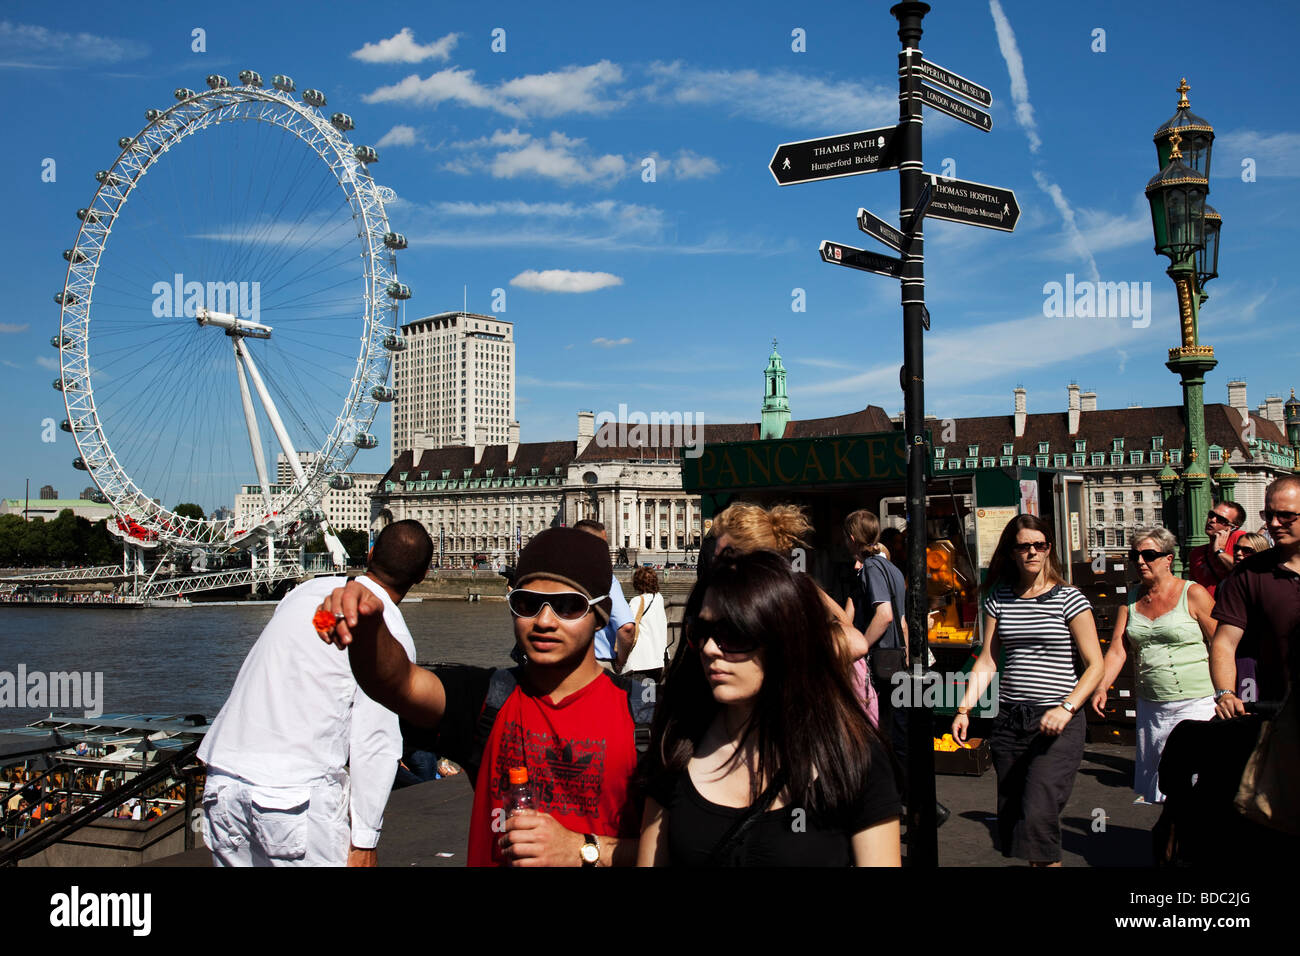 Tourists gather on Westminster Bridge in central London. With the London Eye and other attractions, this is a busy tourism area. Stock Photo